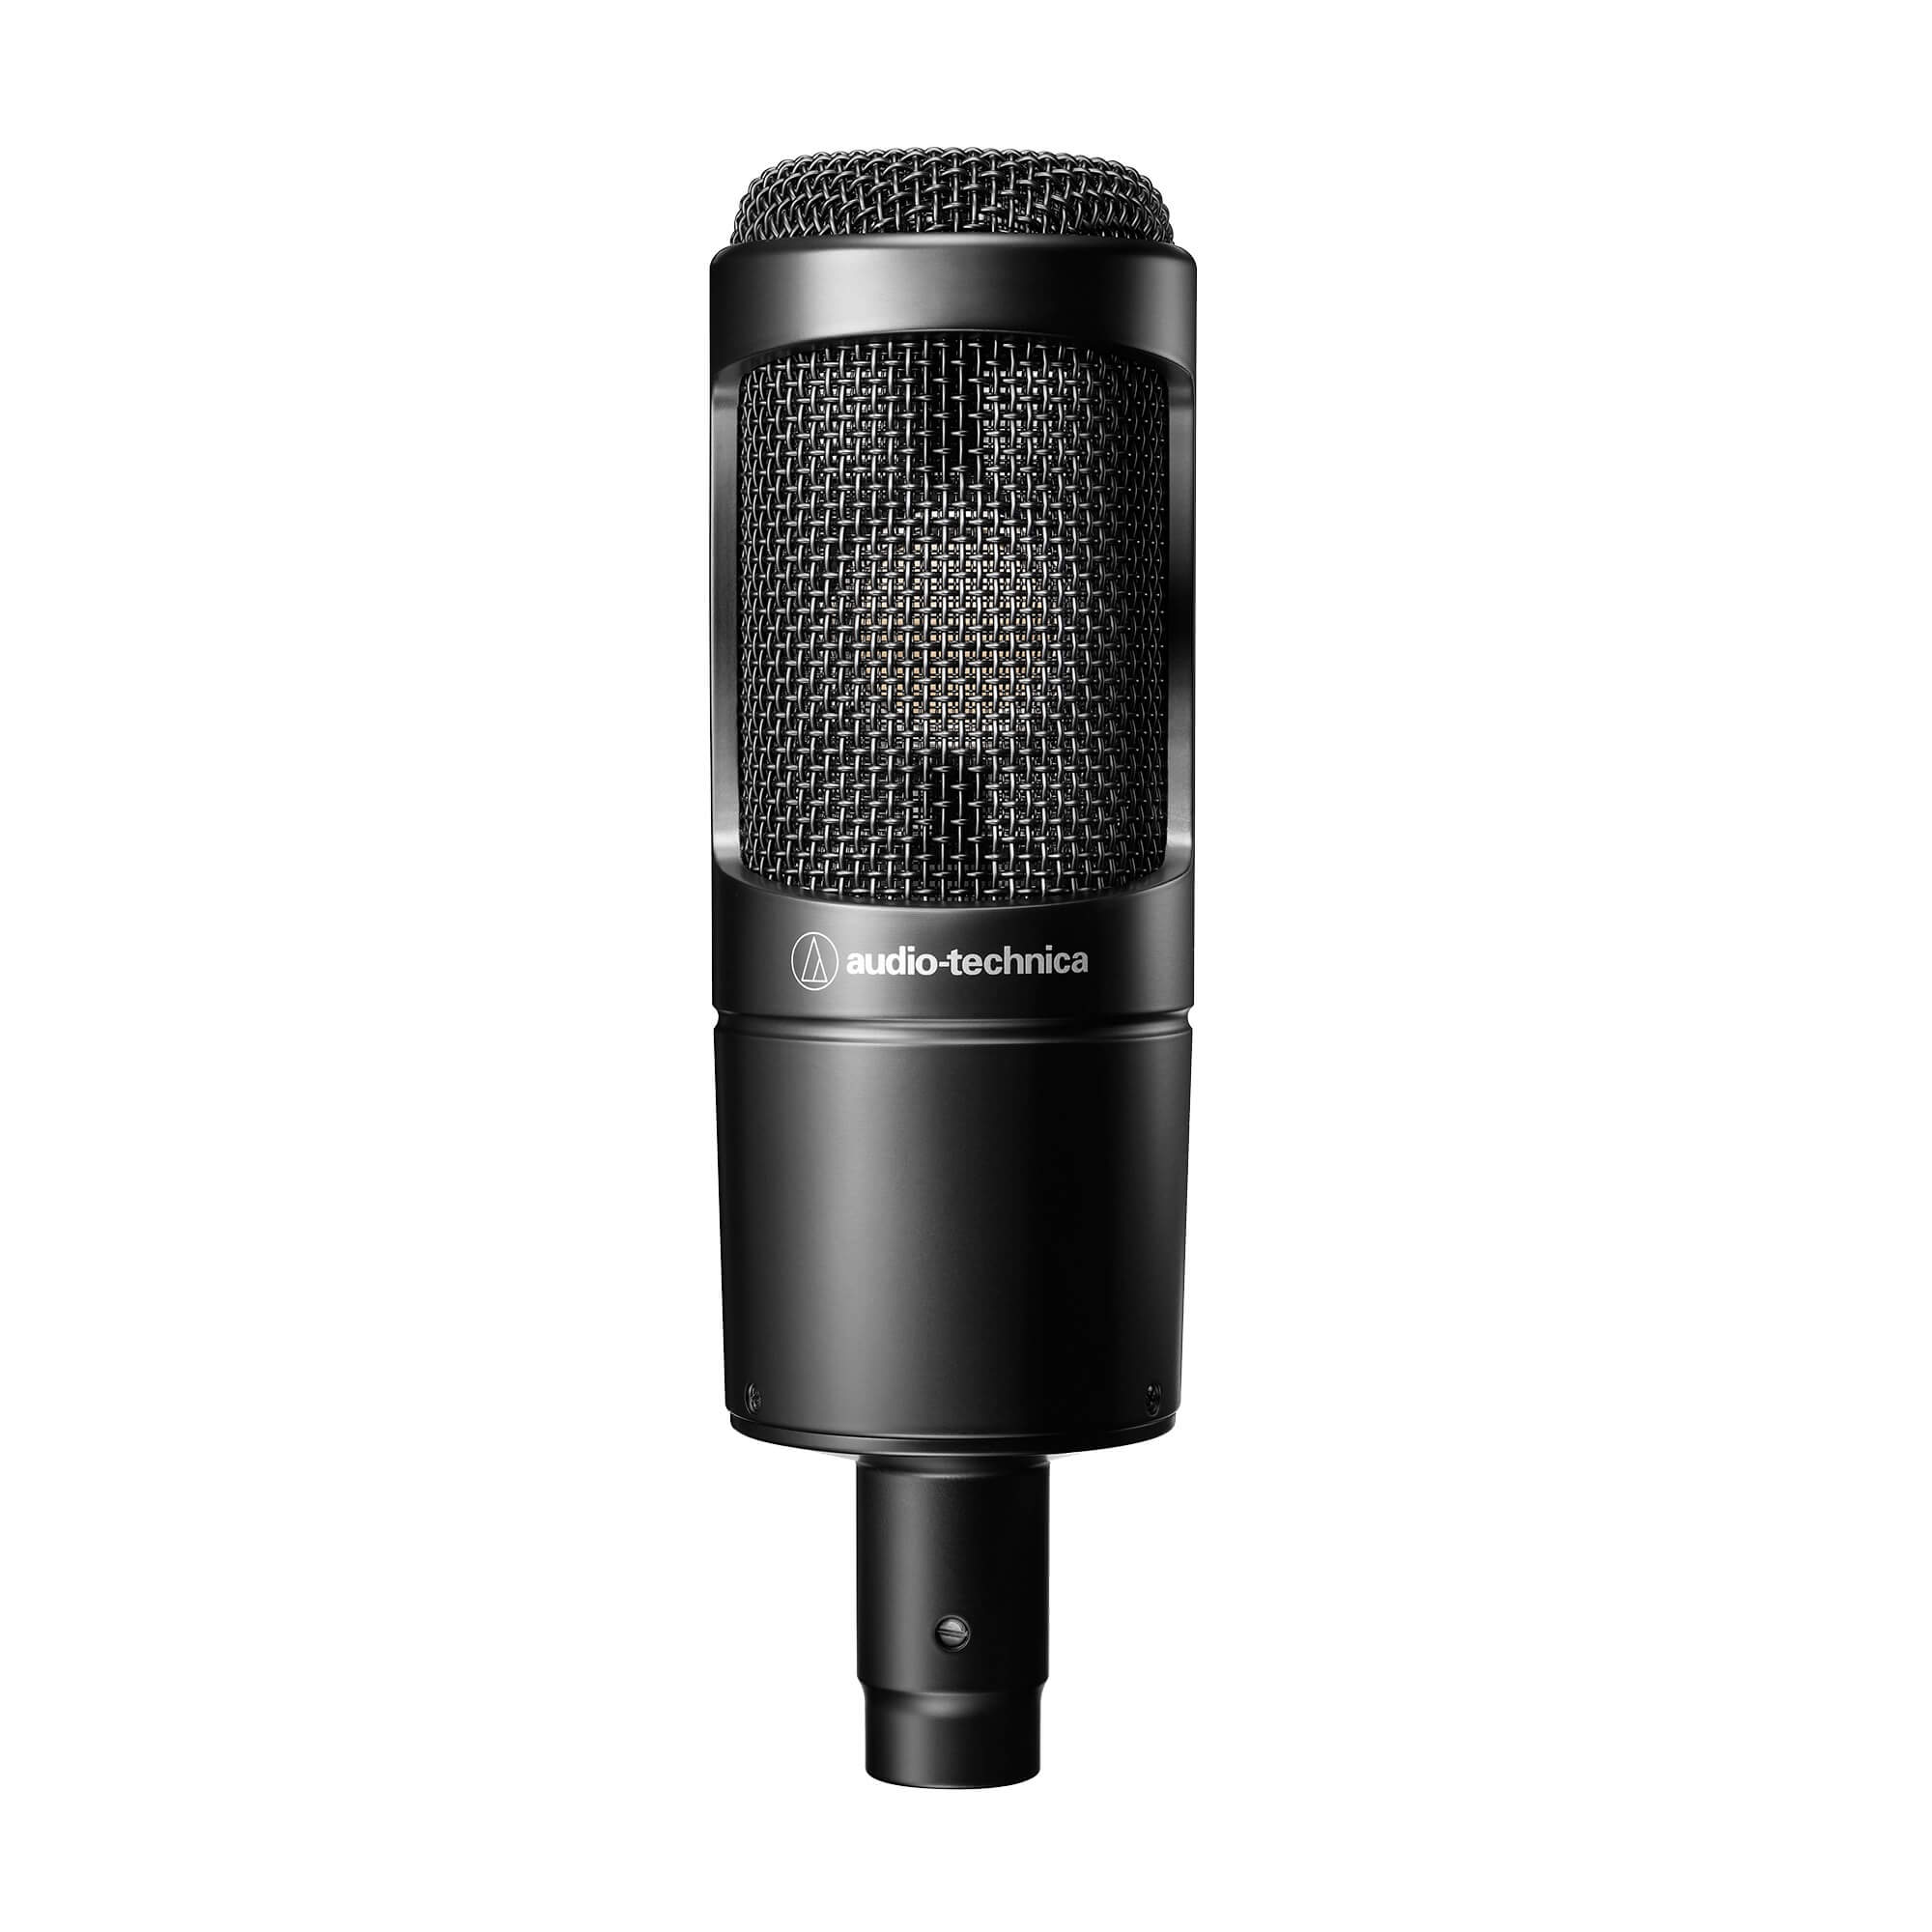 Audio-Technica AT2035 - Cardioid Condenser Side-Address Microphone